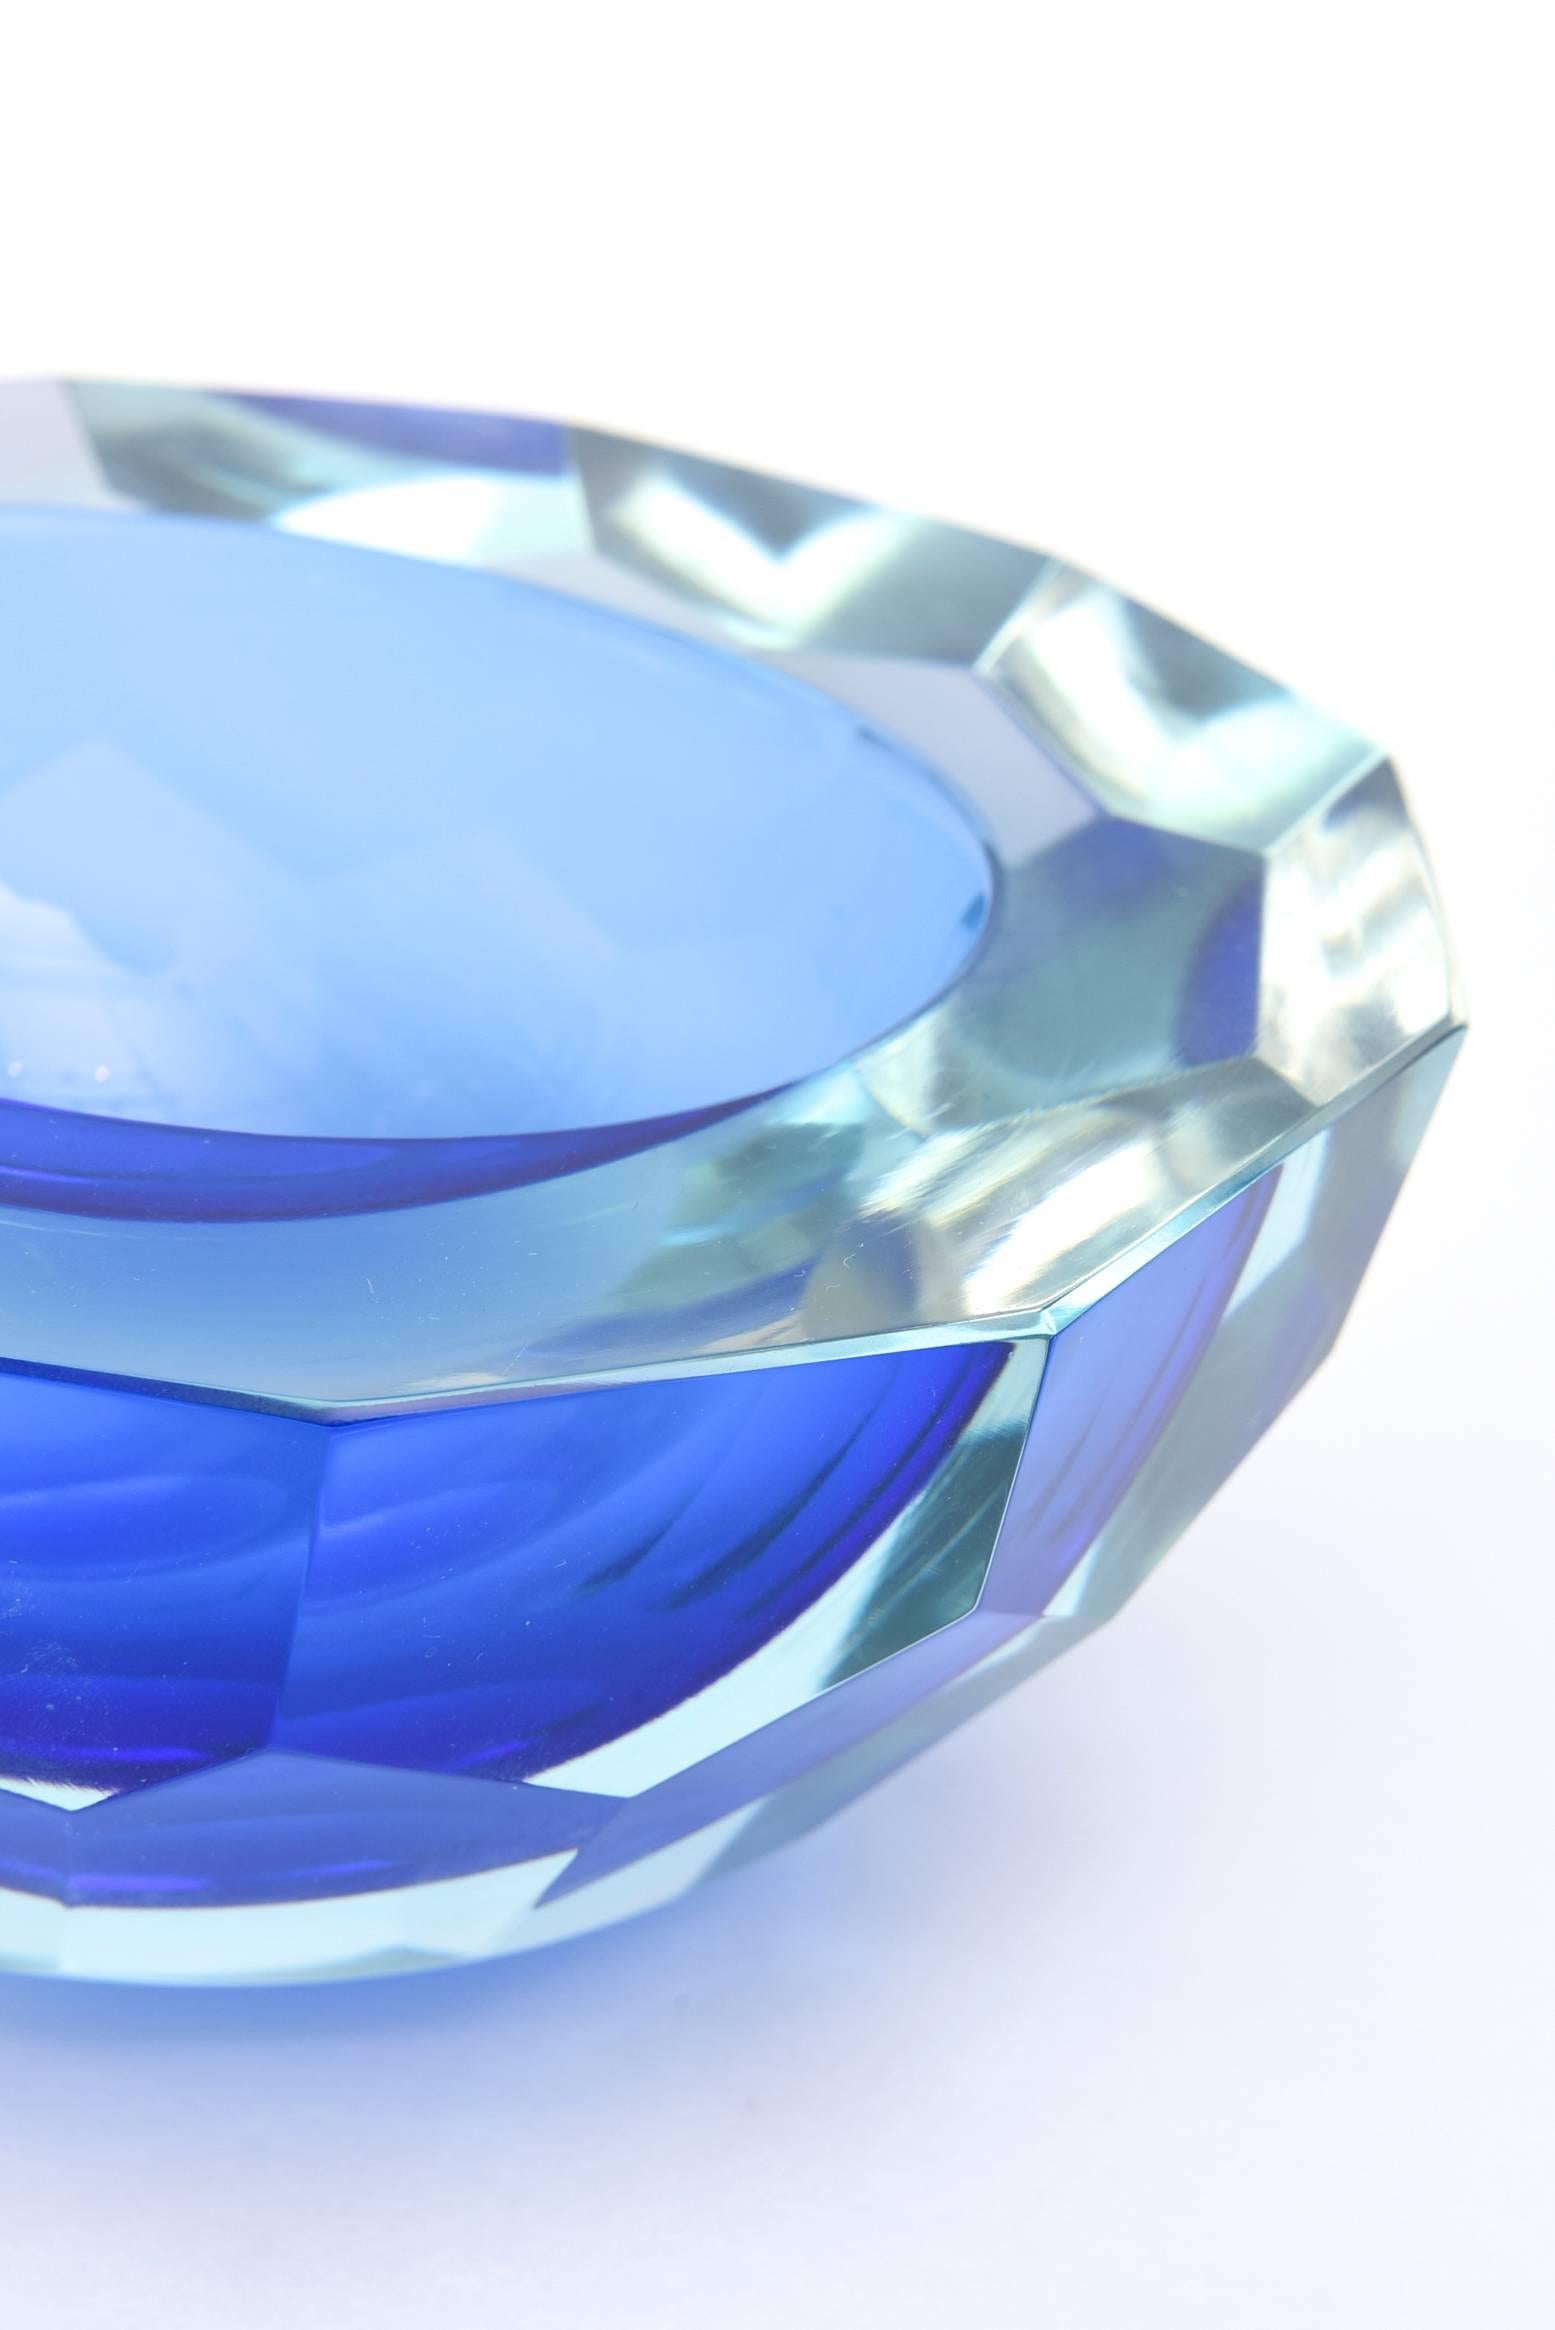 Italian Murano Sommerso Diamond Faceted Flat Cut Polished Glass Geode Bowl 4